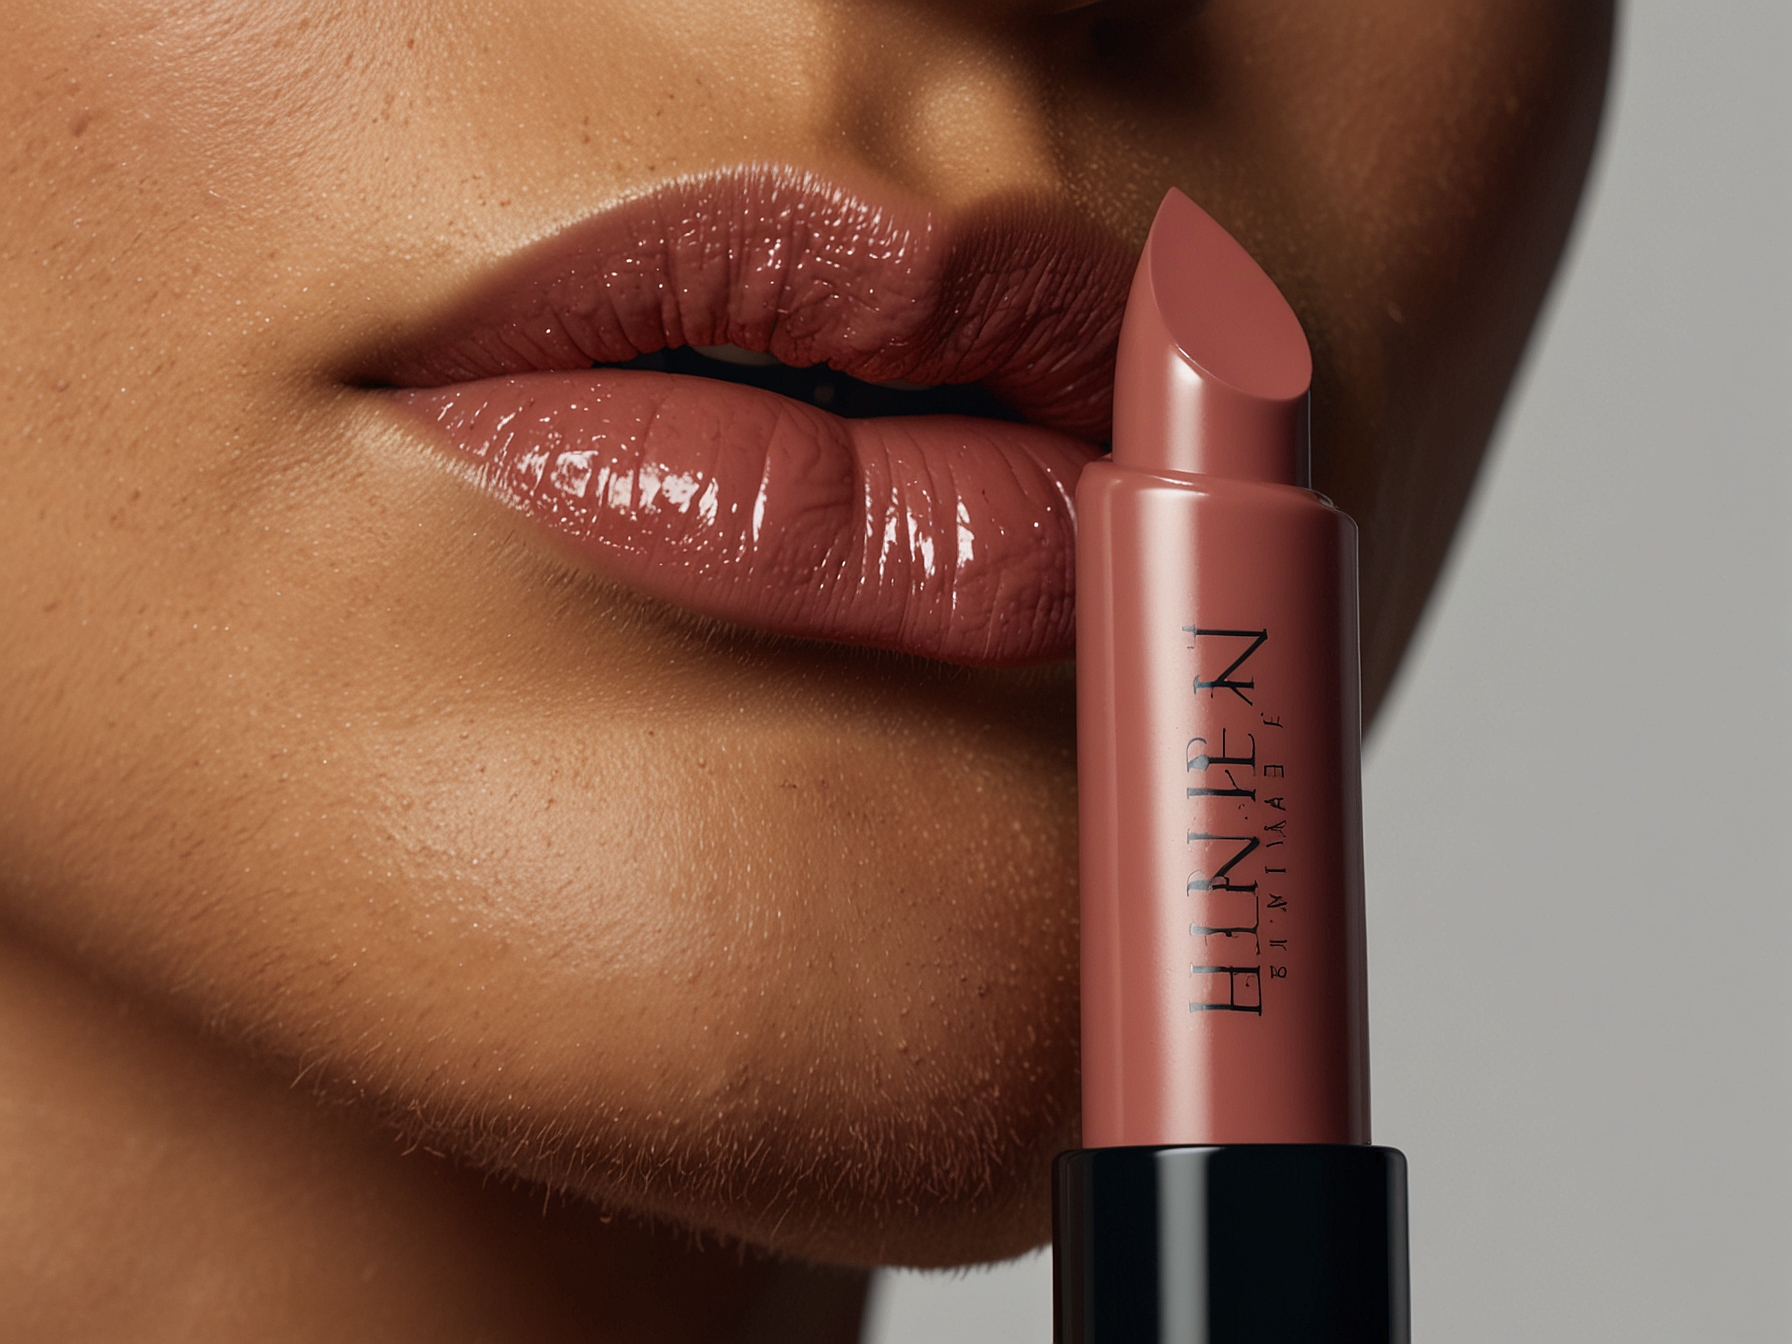 Close-up shot of a user applying the Fenty Beauty Gloss Bomb from the Boots beauty box, highlighting its universally flattering shade and smooth texture. Ideal for adding a touch of glamour.